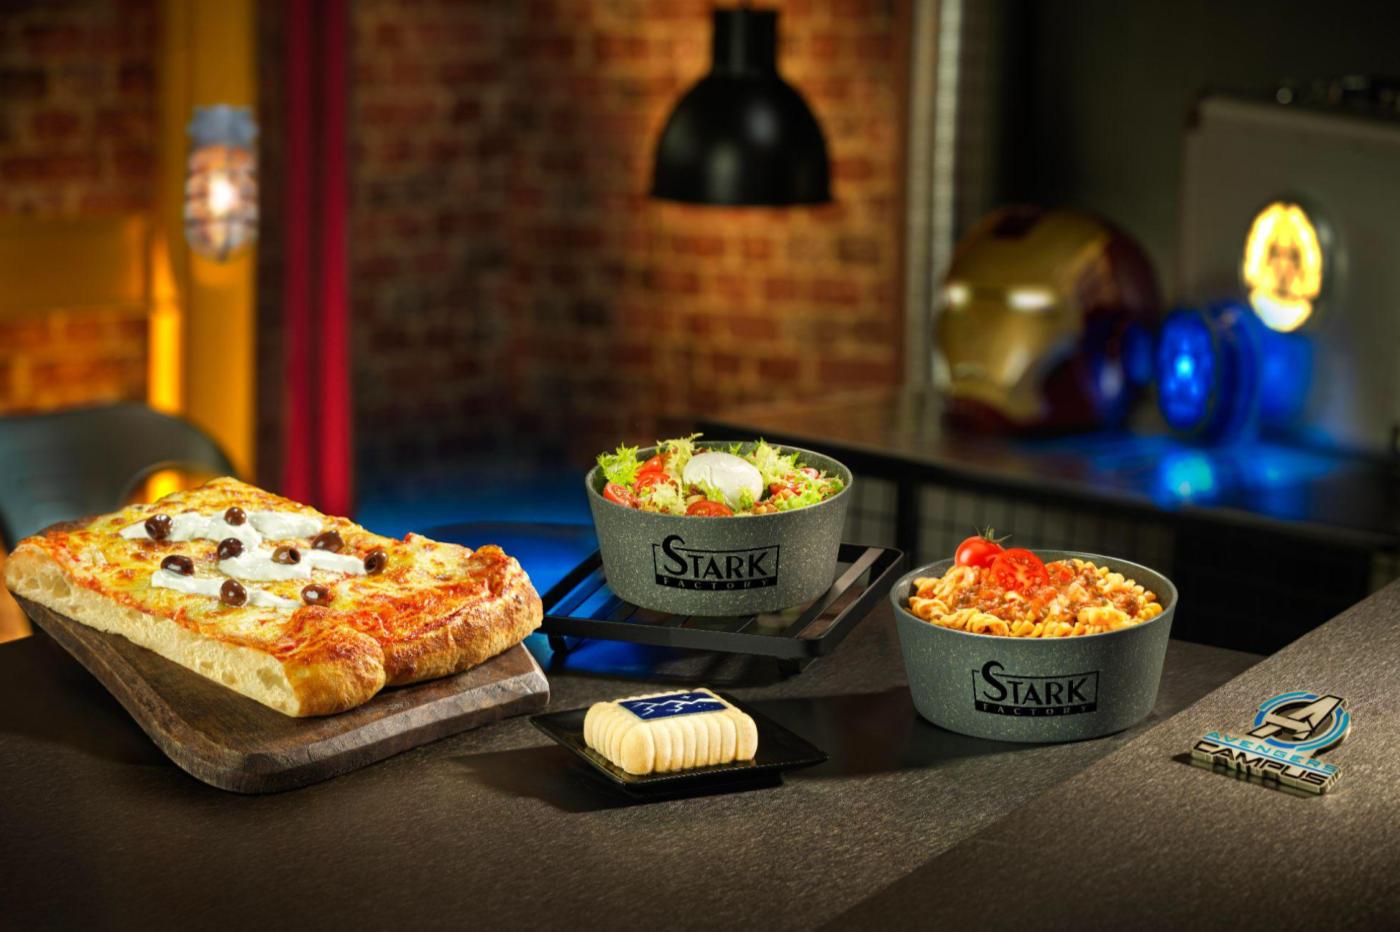 Promotional image of the food offered in the Stark Factory restaurant